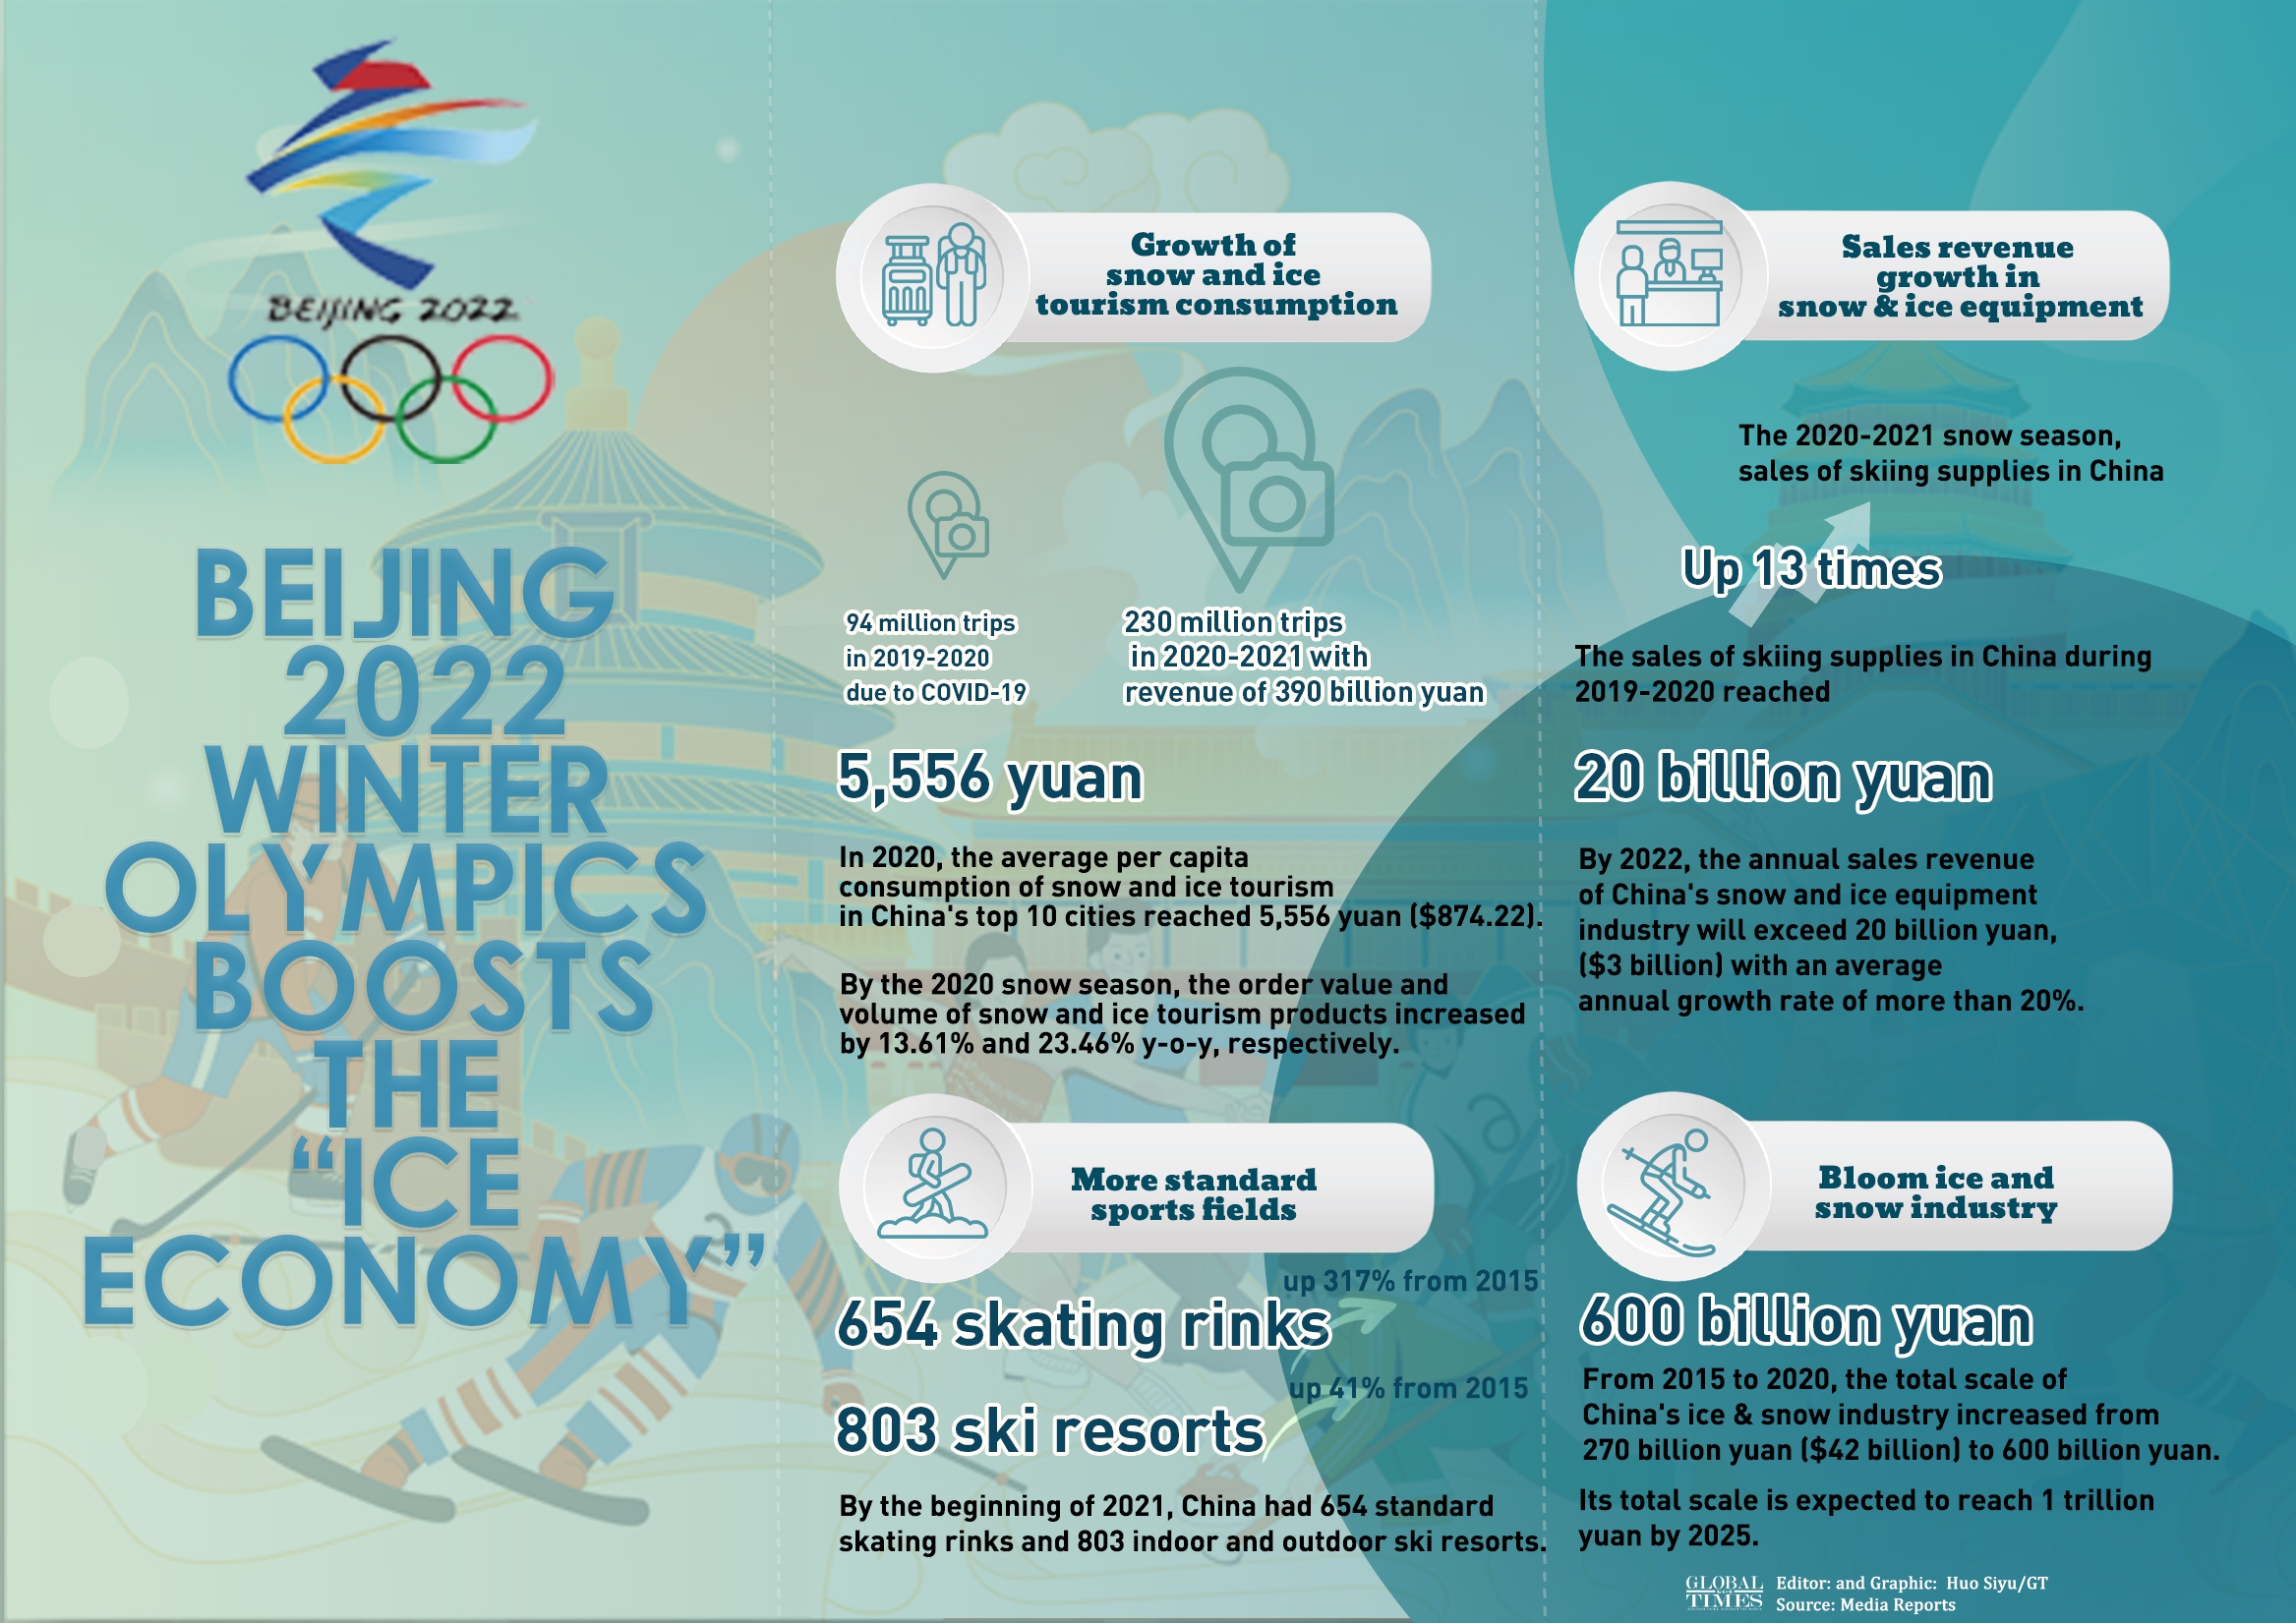 Beijing Winter Olympic Games boots ‘ice economy’. Graphic: Huo Siyu/Global Times